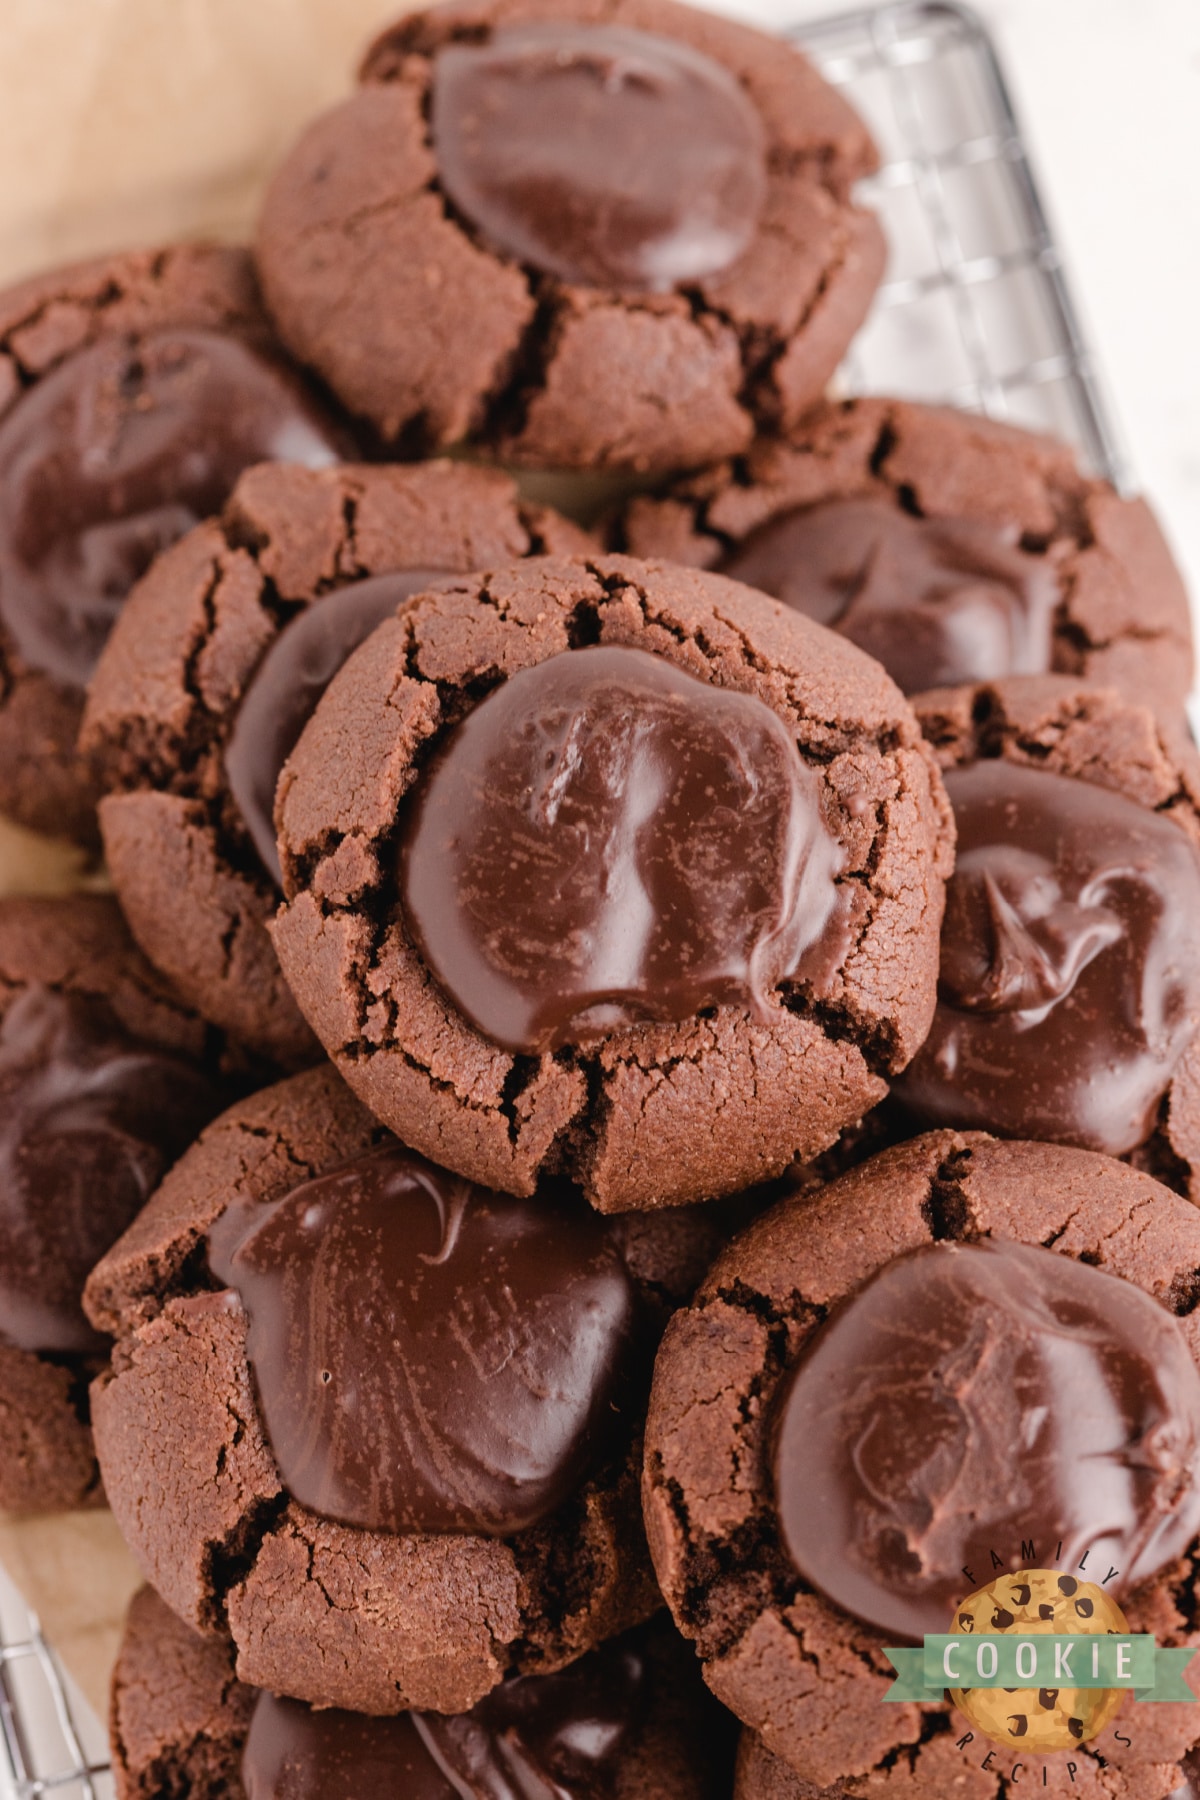 Double Chocolate Thumbprint Cookies are thick, chewy chocolate cookies filled with a creamy chocolate ganache. Perfect chocolate cookie recipe for all chocolate lovers!